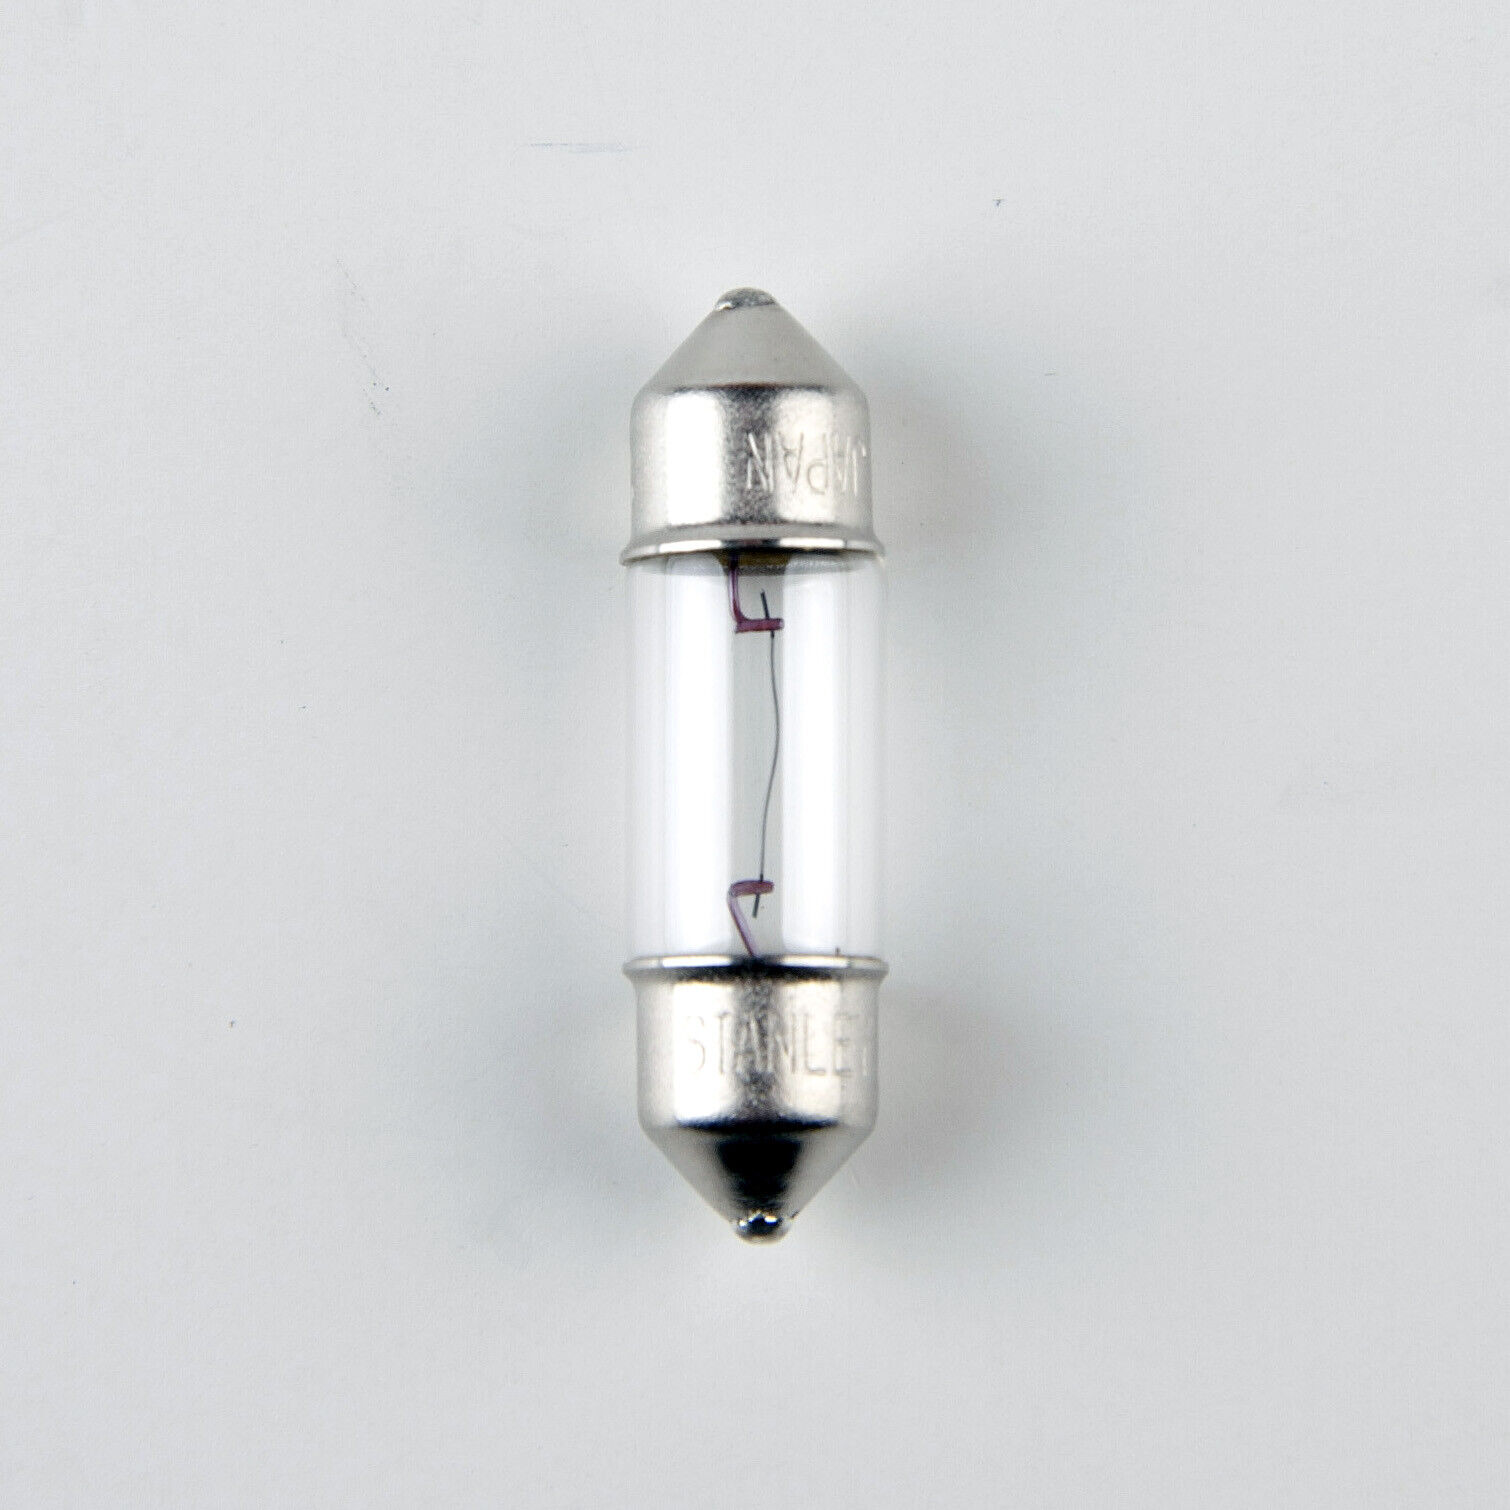 Stanley A3022C 12V 5W T8X29 Clear Auto Bulb, Made in Japan Quantity=1 Bulb